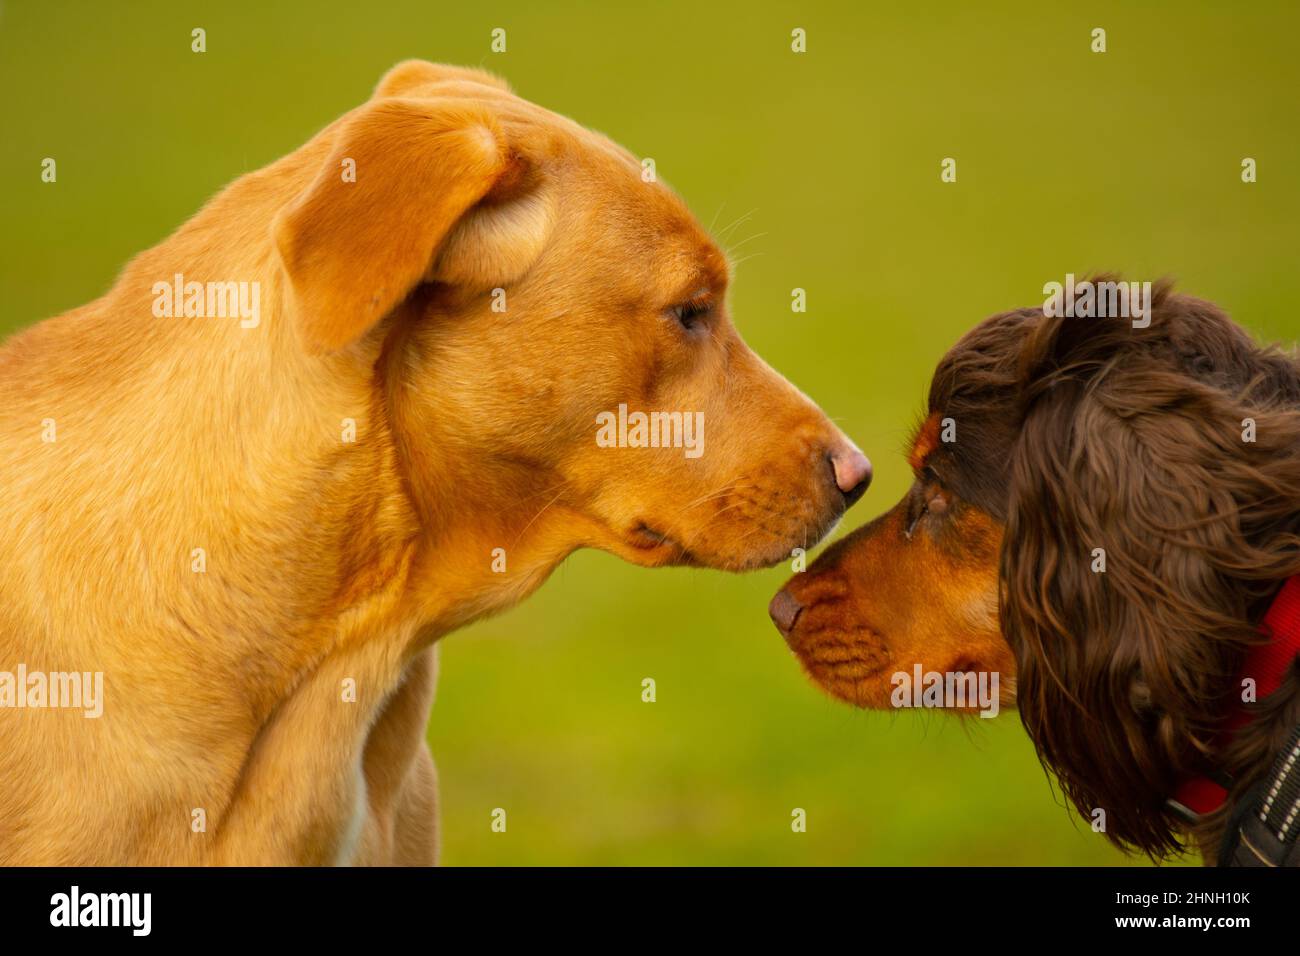 Two dogs look at eachother when they meet for the first time with vibrant green in the background. Stock Photo